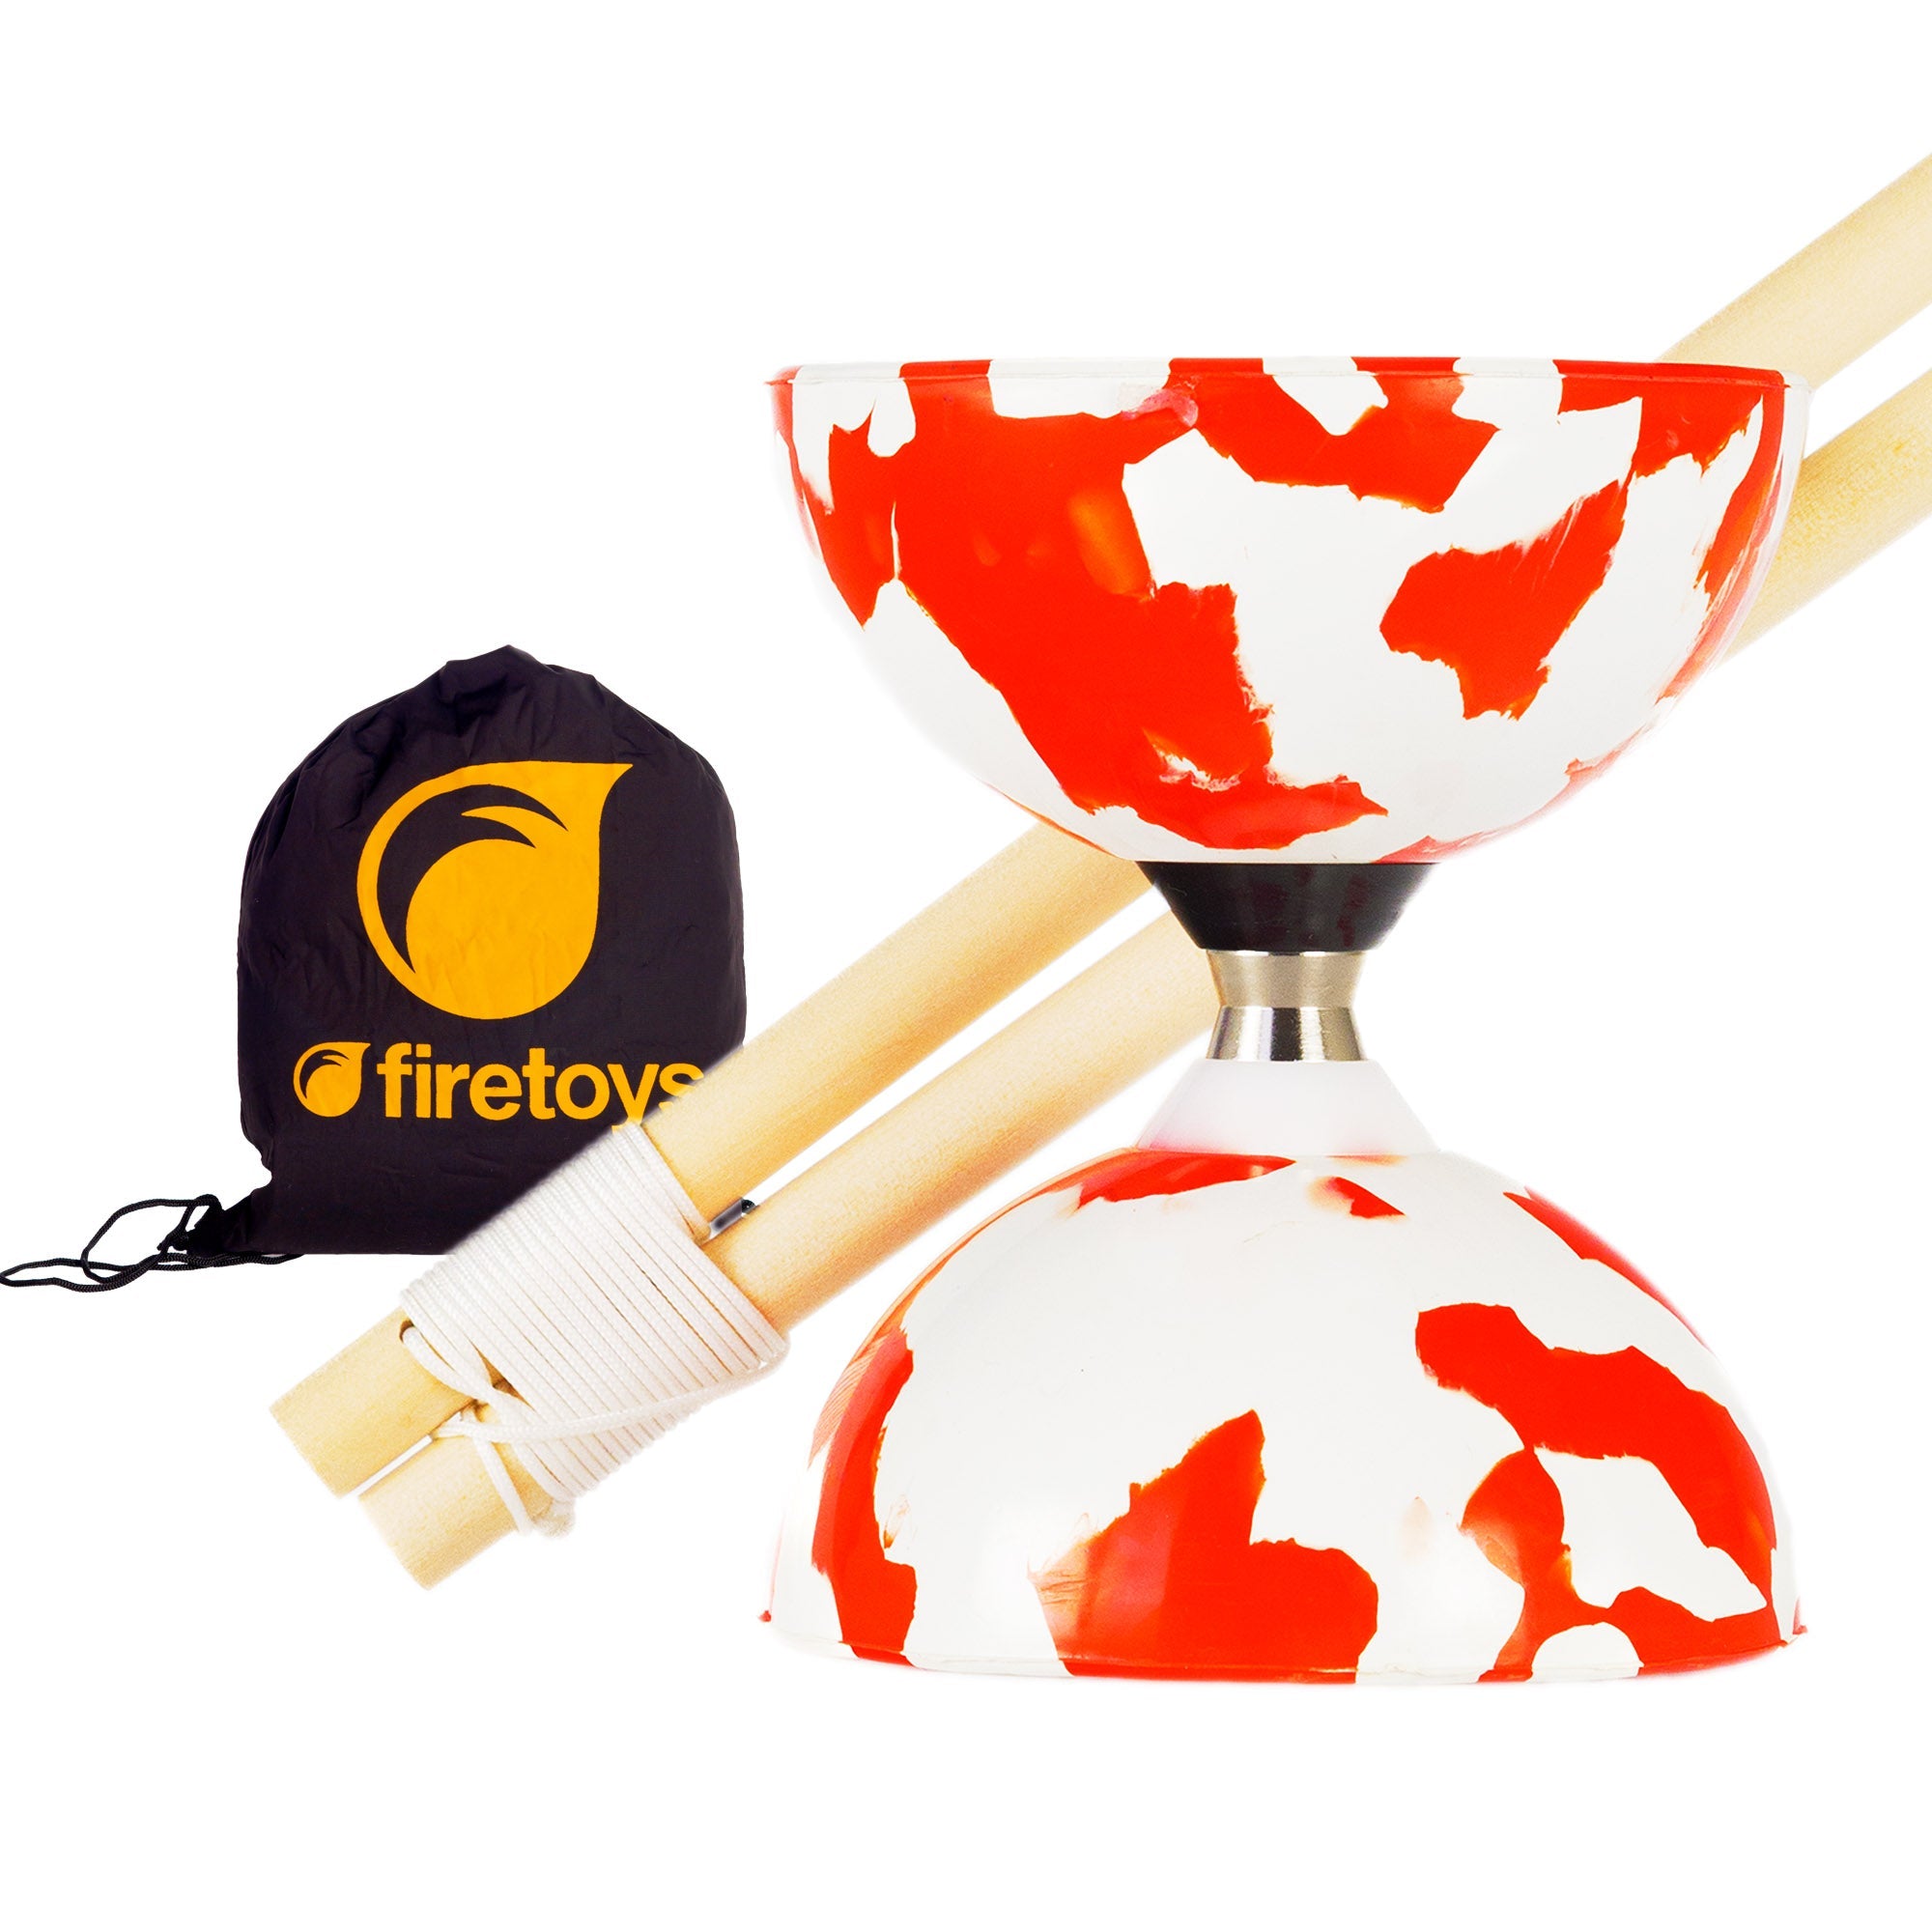 white/red diabolo with wooden sticks